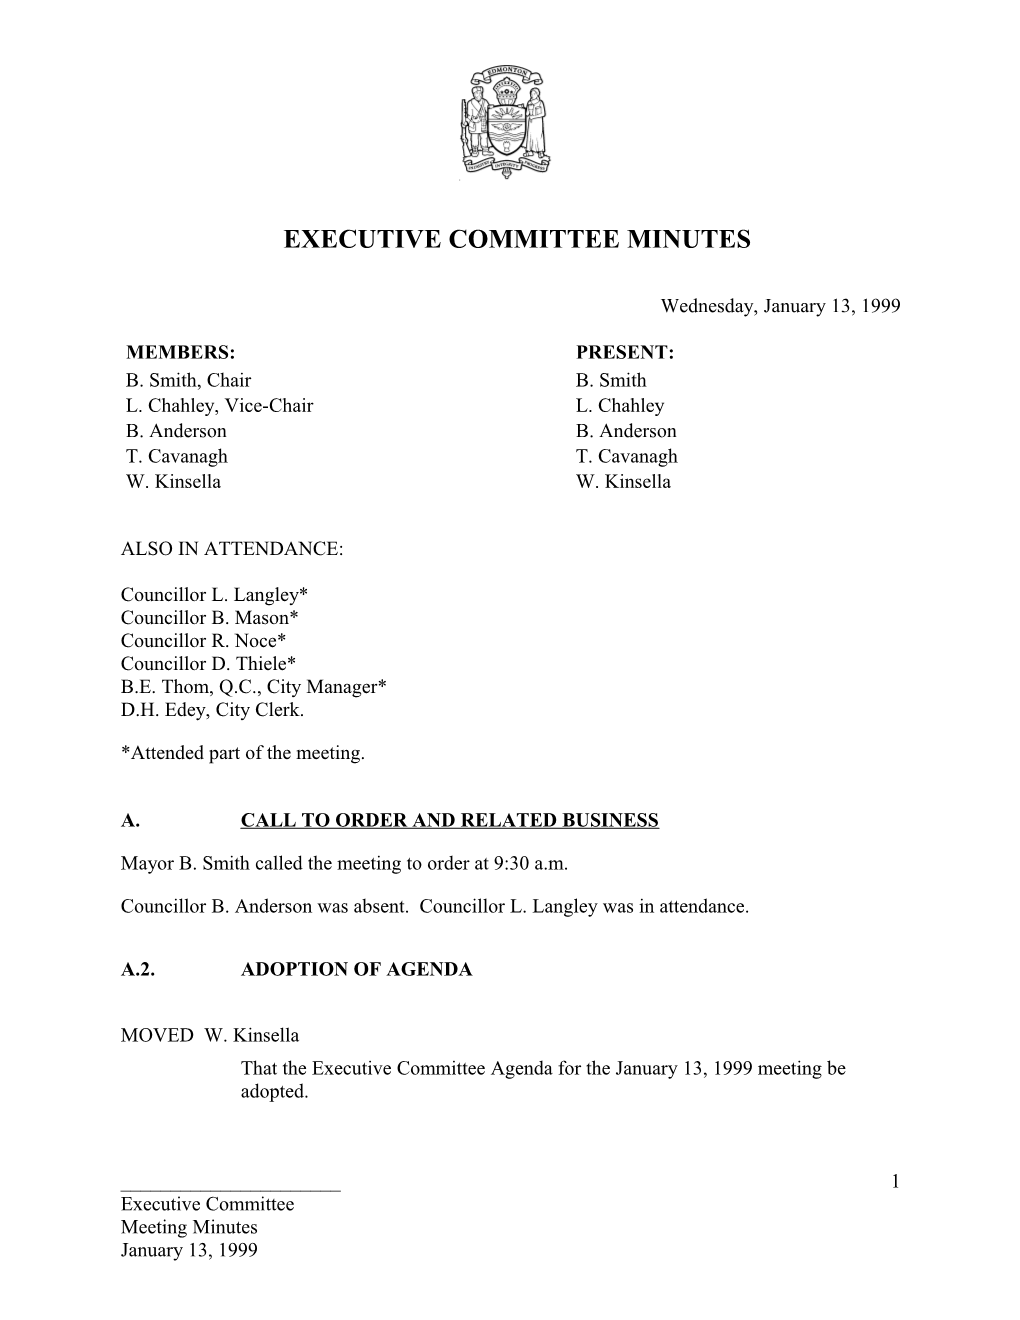 Minutes for Executive Committee January 13, 1999 Meeting